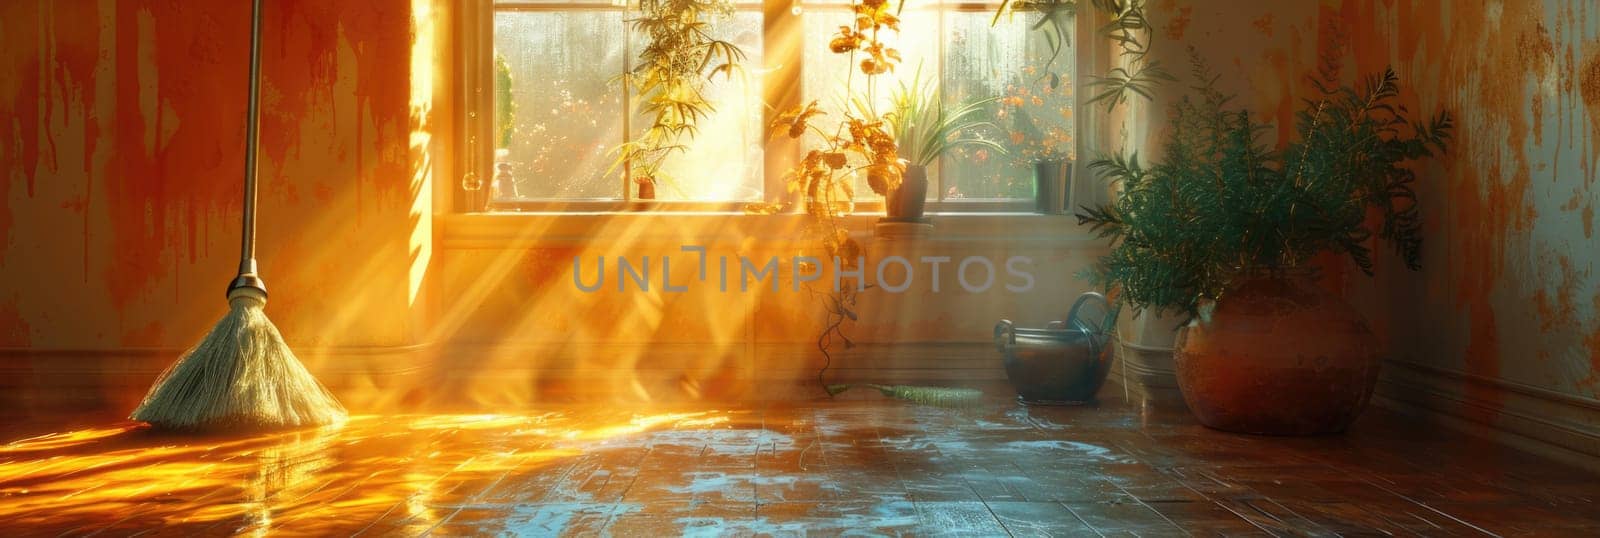 A broom stands next to a potted plant on the floor in front of a window illuminated by the sun.